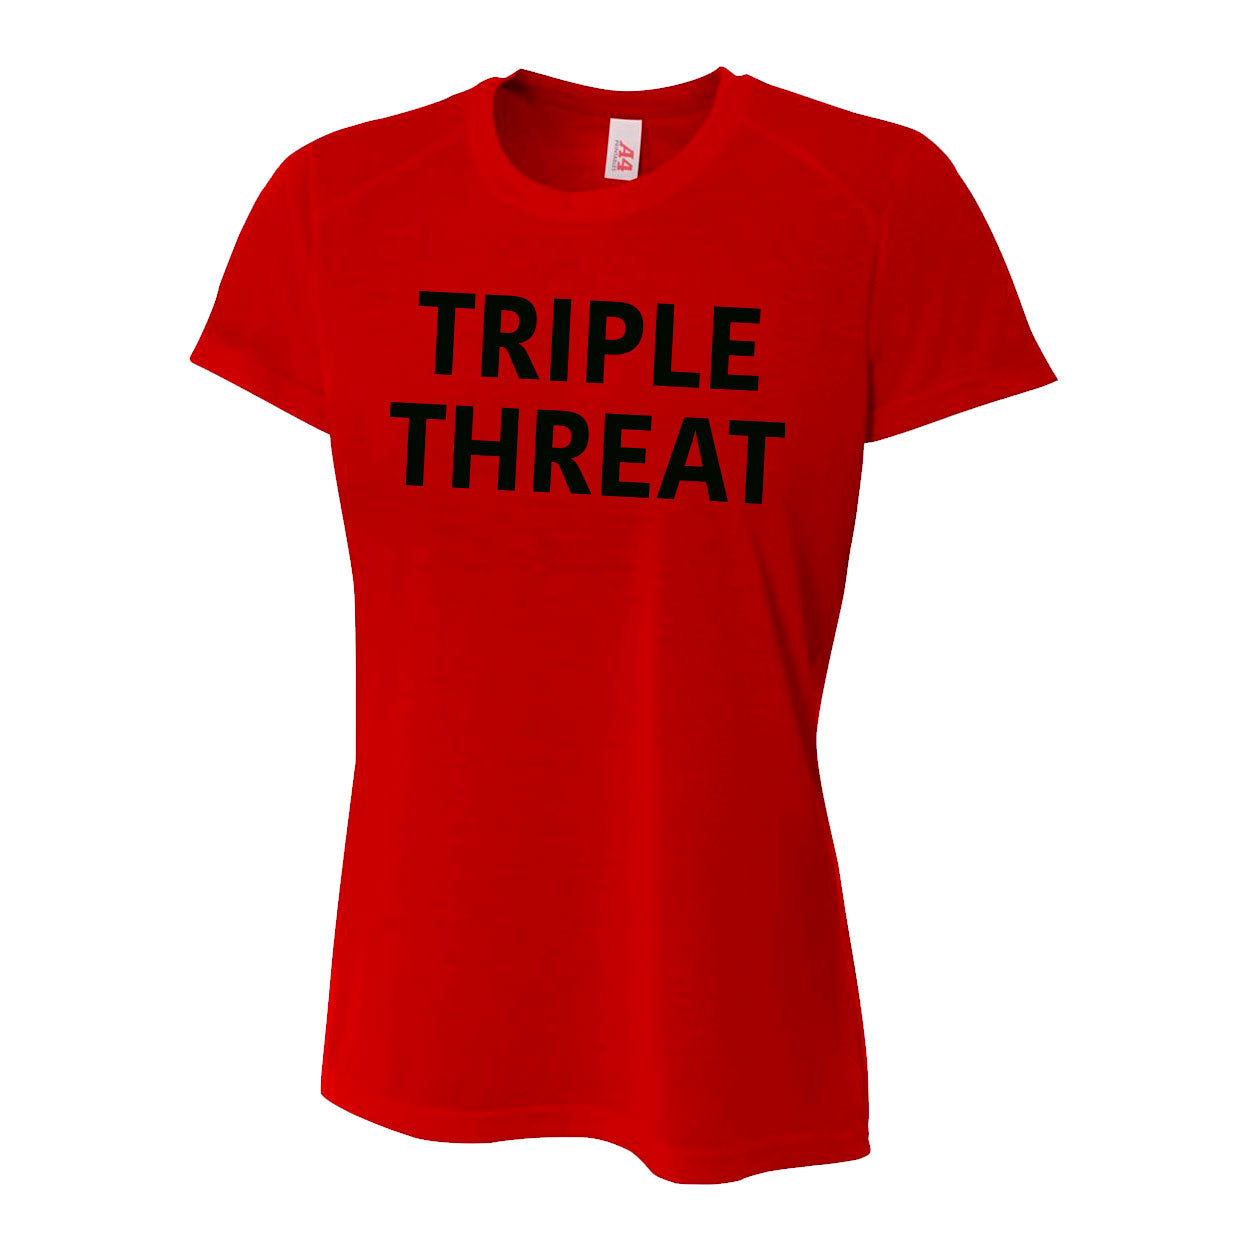 TRIPLE THREAT YOUTH, WOMEN'S & MEN'S PERFORMANCE SHORT SLEEVE TEE - RED